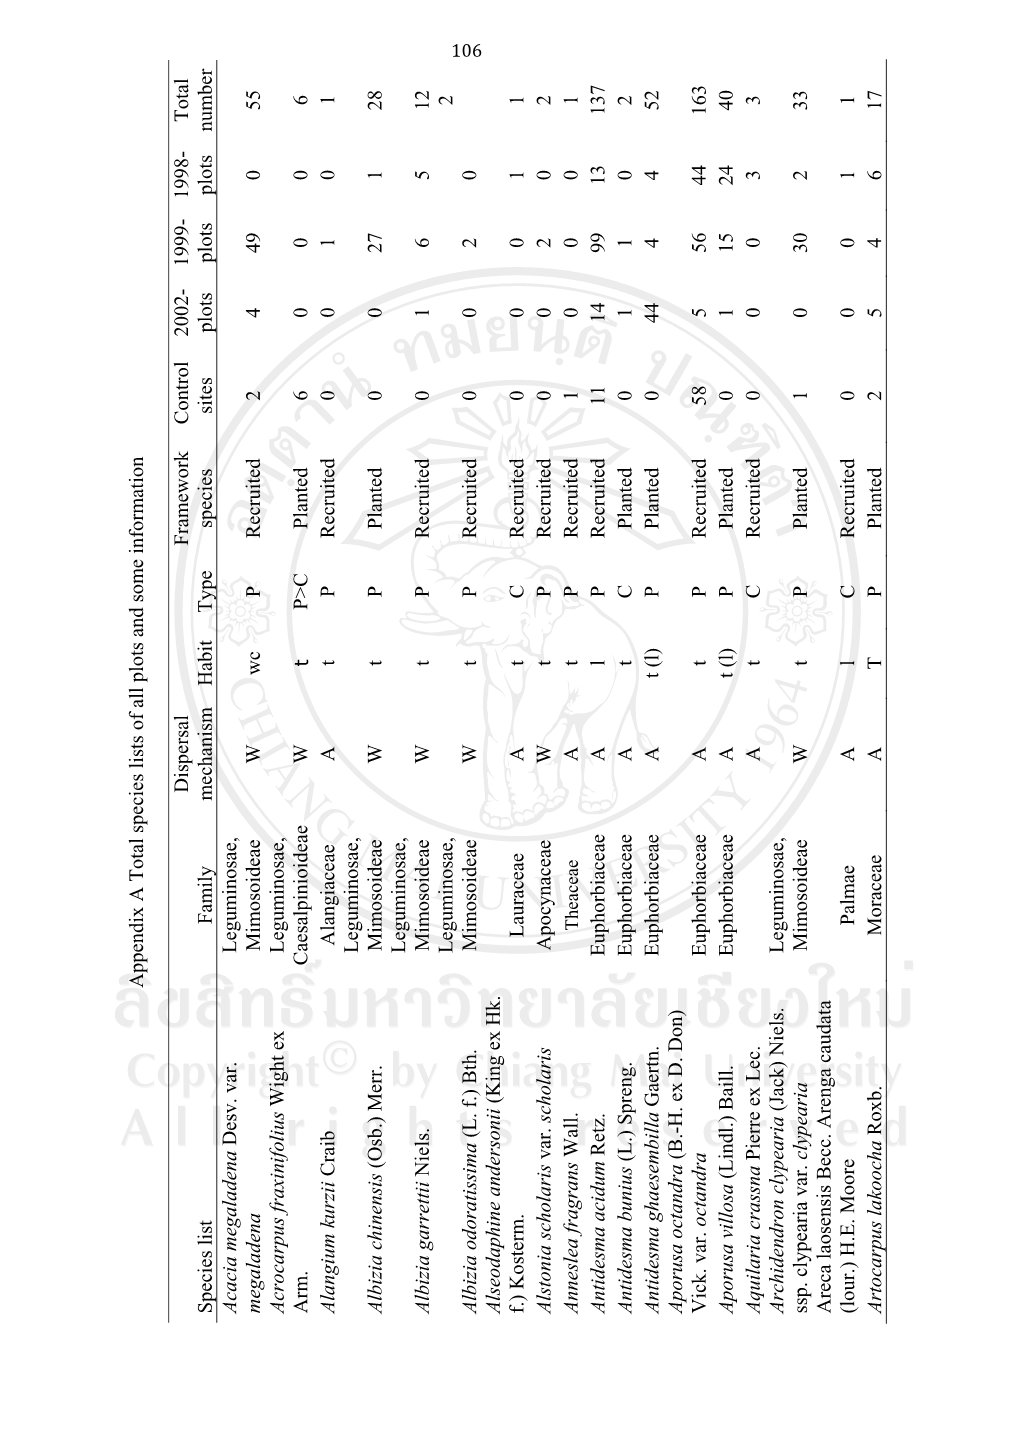 Appendix a Total Species Lists of All Plots and Som E Inform Ation 106